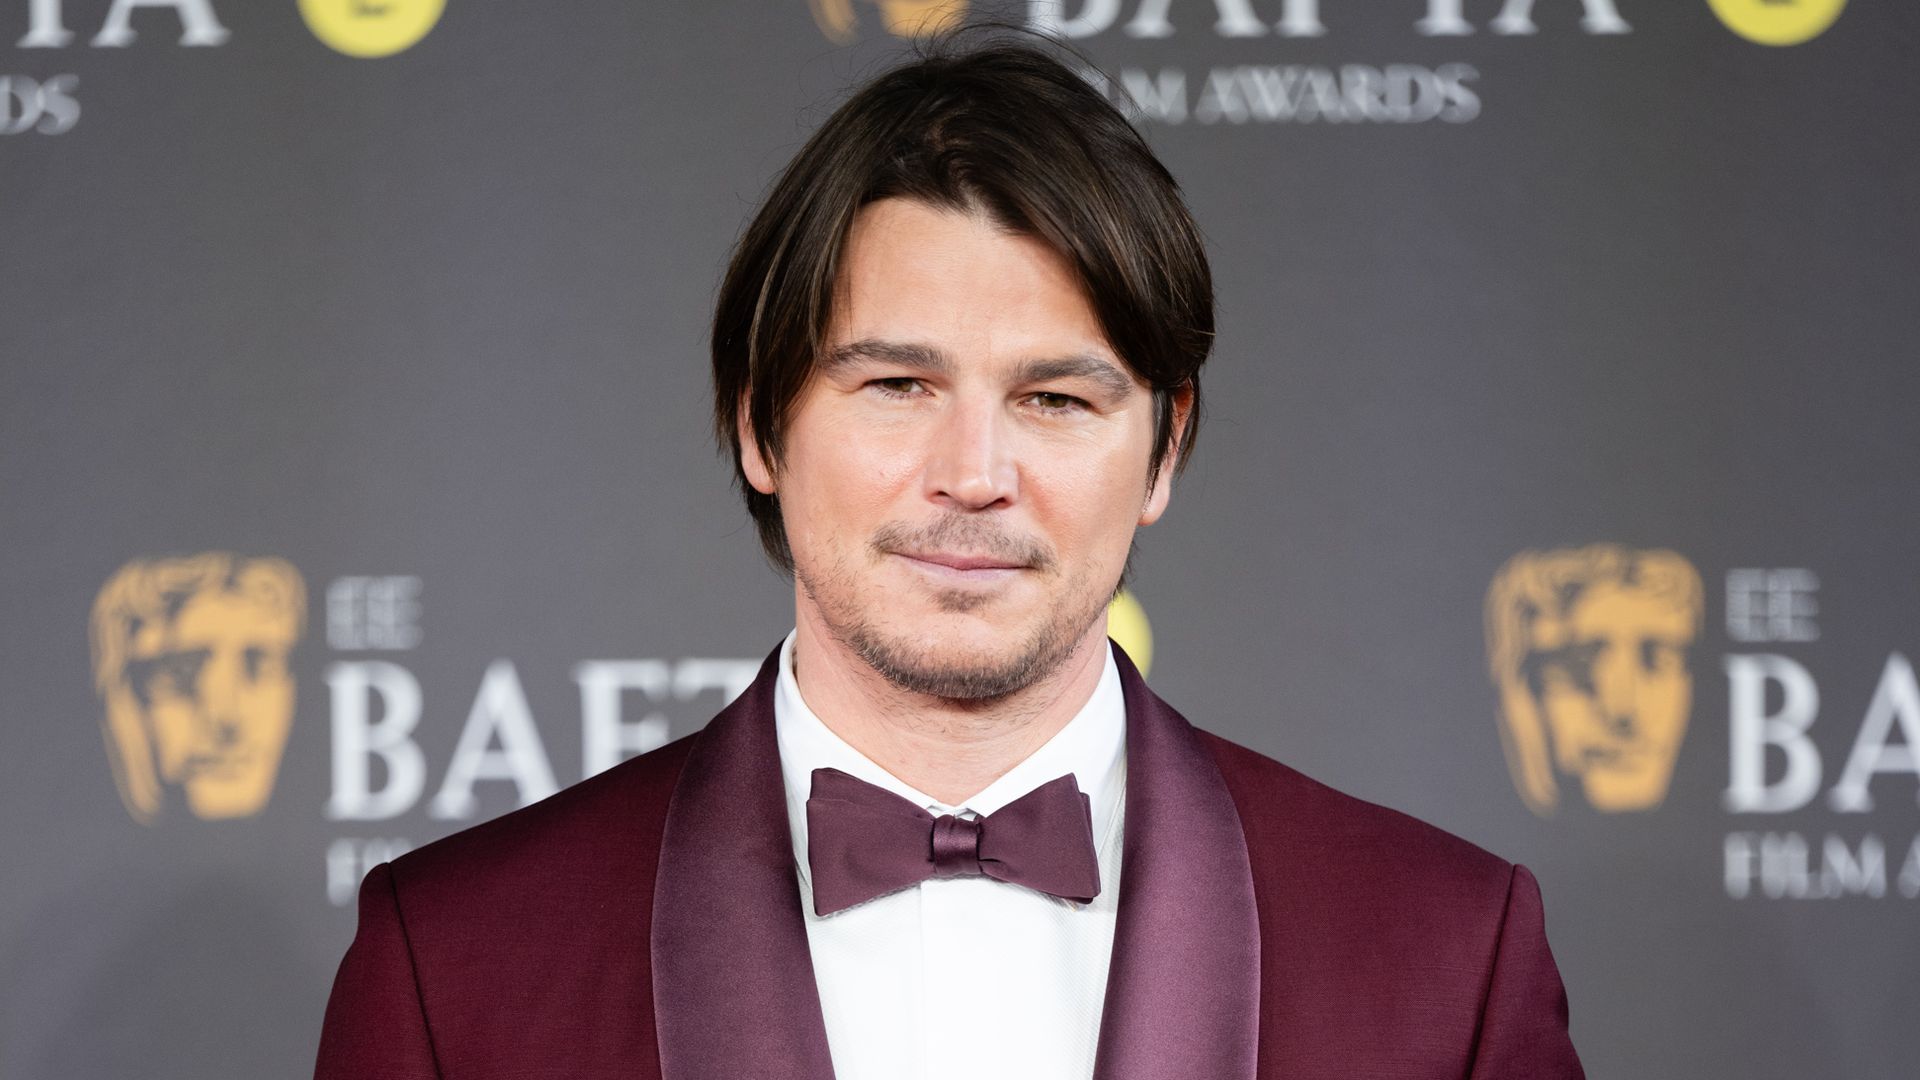 Josh Hartnett, 45, surprises fans as he reveals he privately welcomed a fourth child